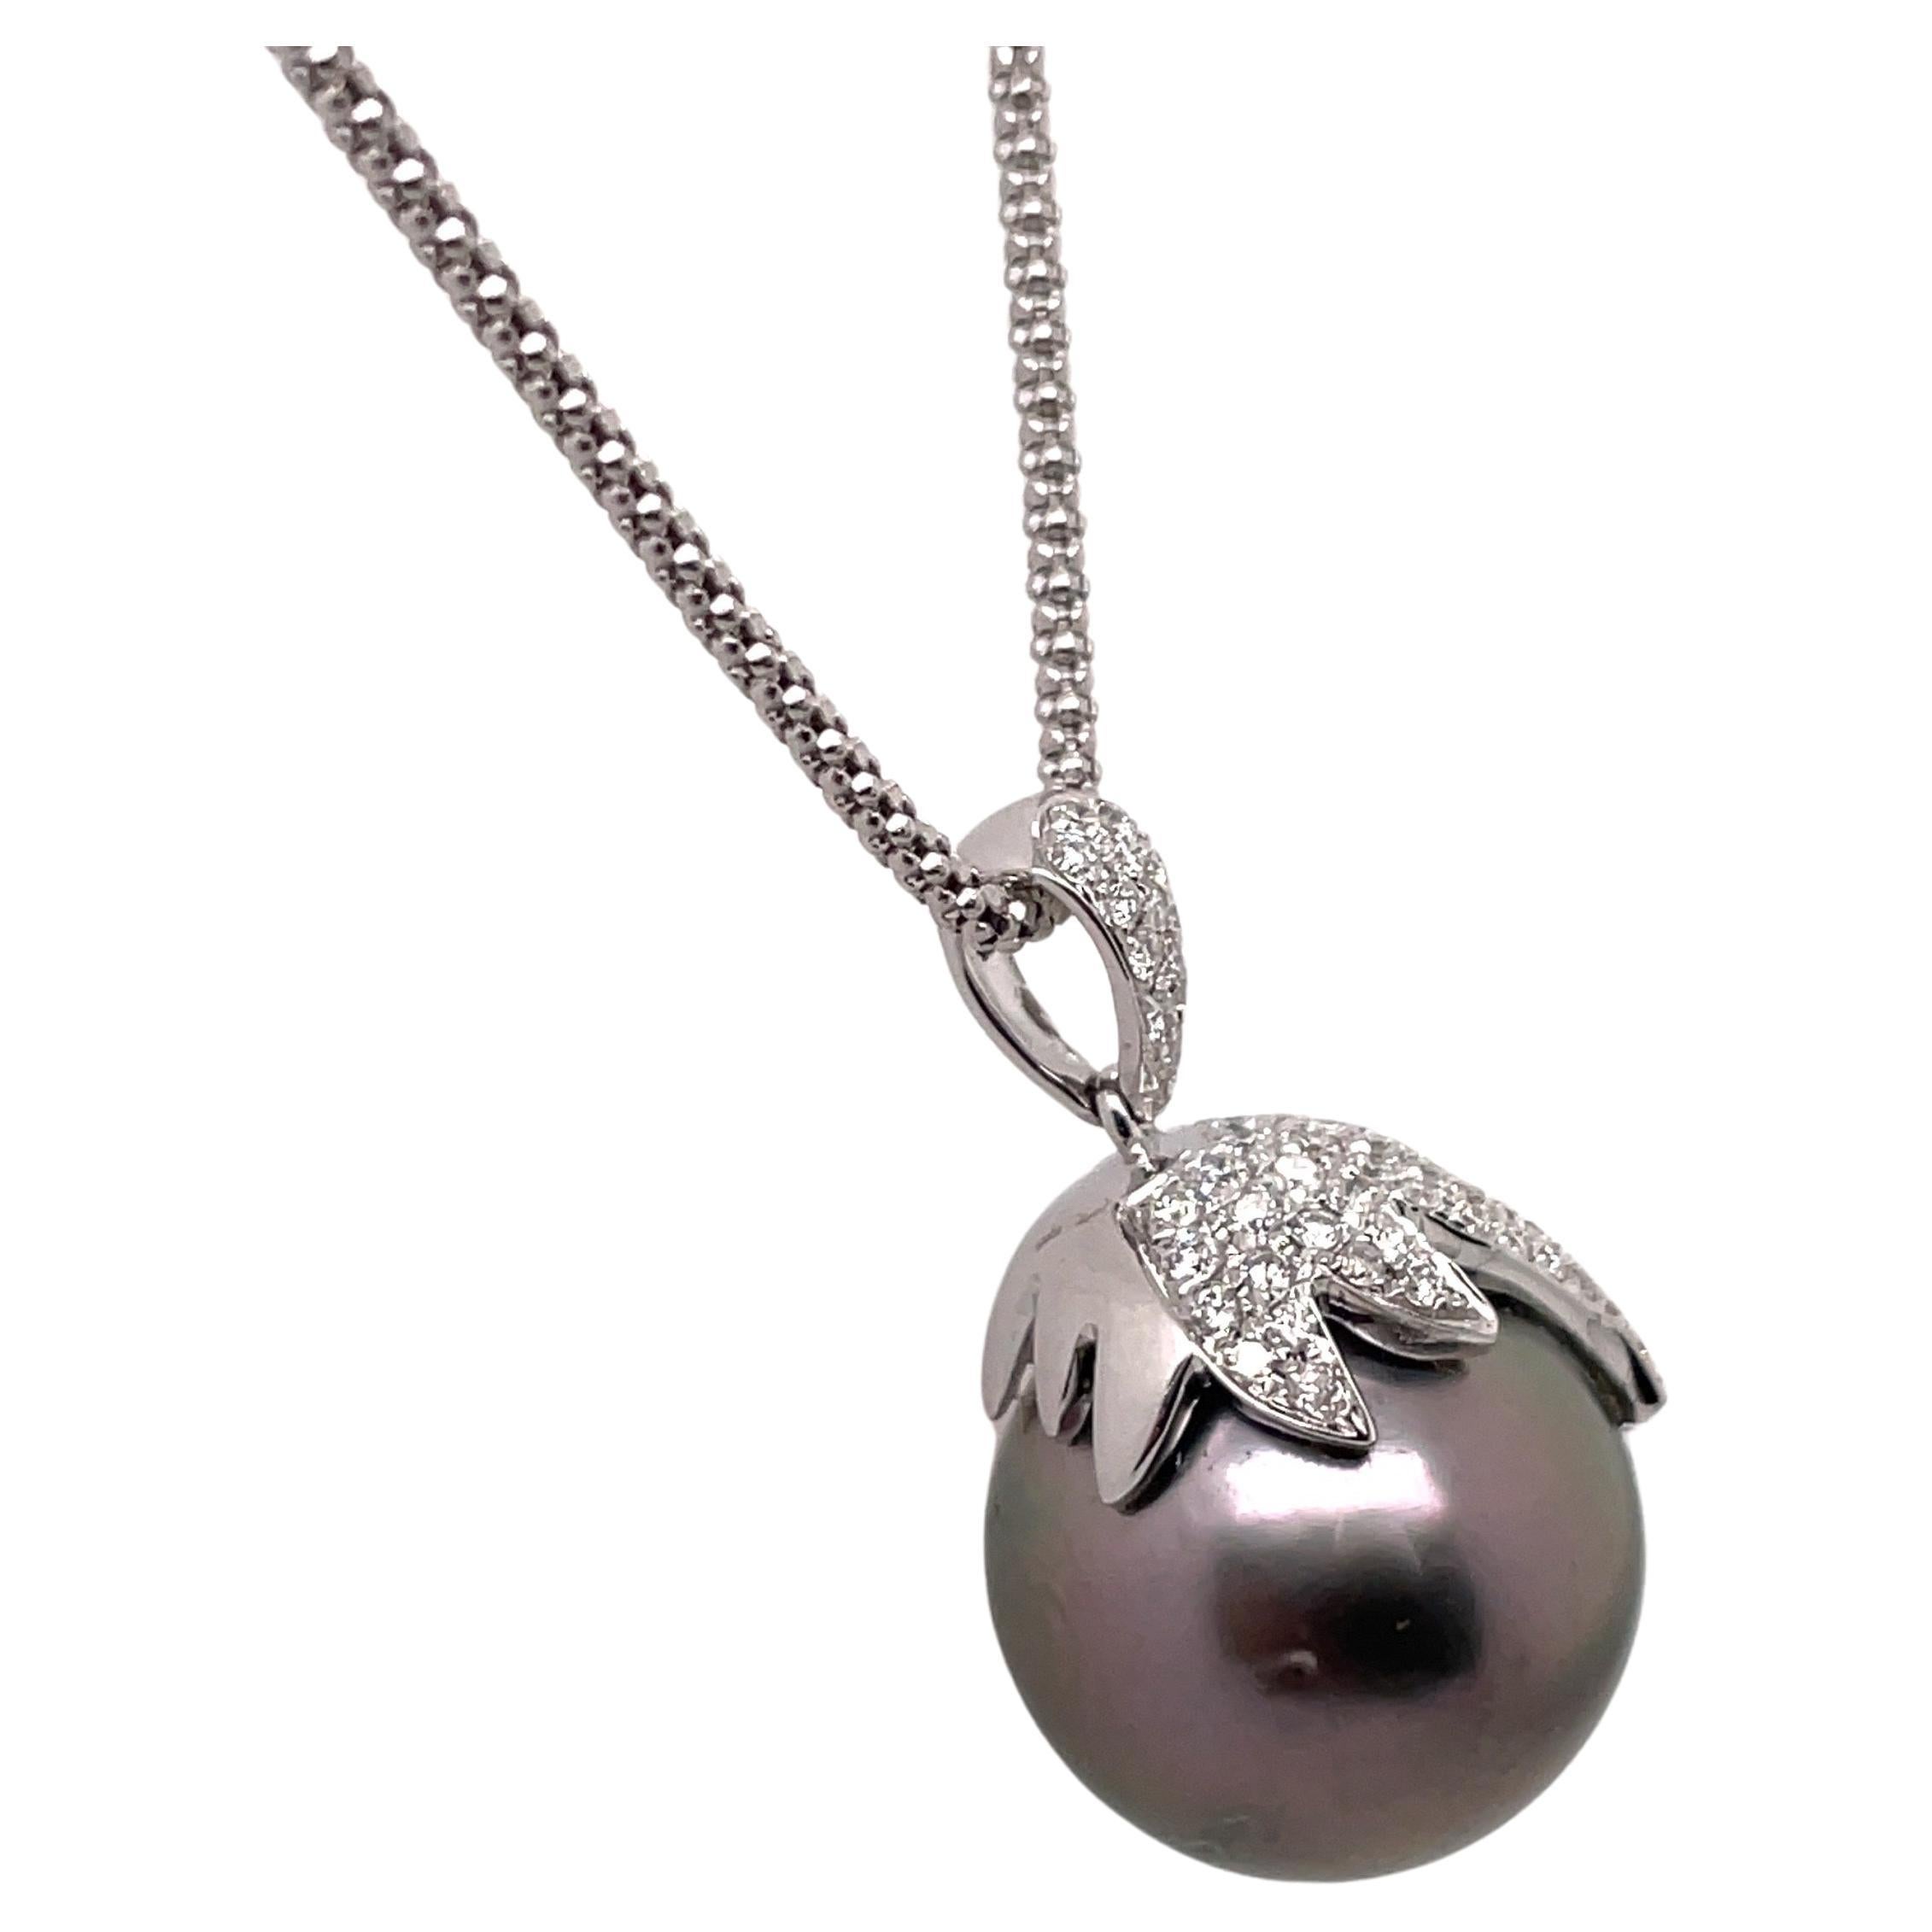 18 Karat white gold pendant featuring one grey Tahitian Pearl measuring 15 mm with a diamond cap of 86 round brilliants weighing 0.83 carats. 

Diamond Bale 8.4 MM Long
Diamond Cap with Pearl measures 18.9 MM Long
Pedant total 27.3 MM Long

Color